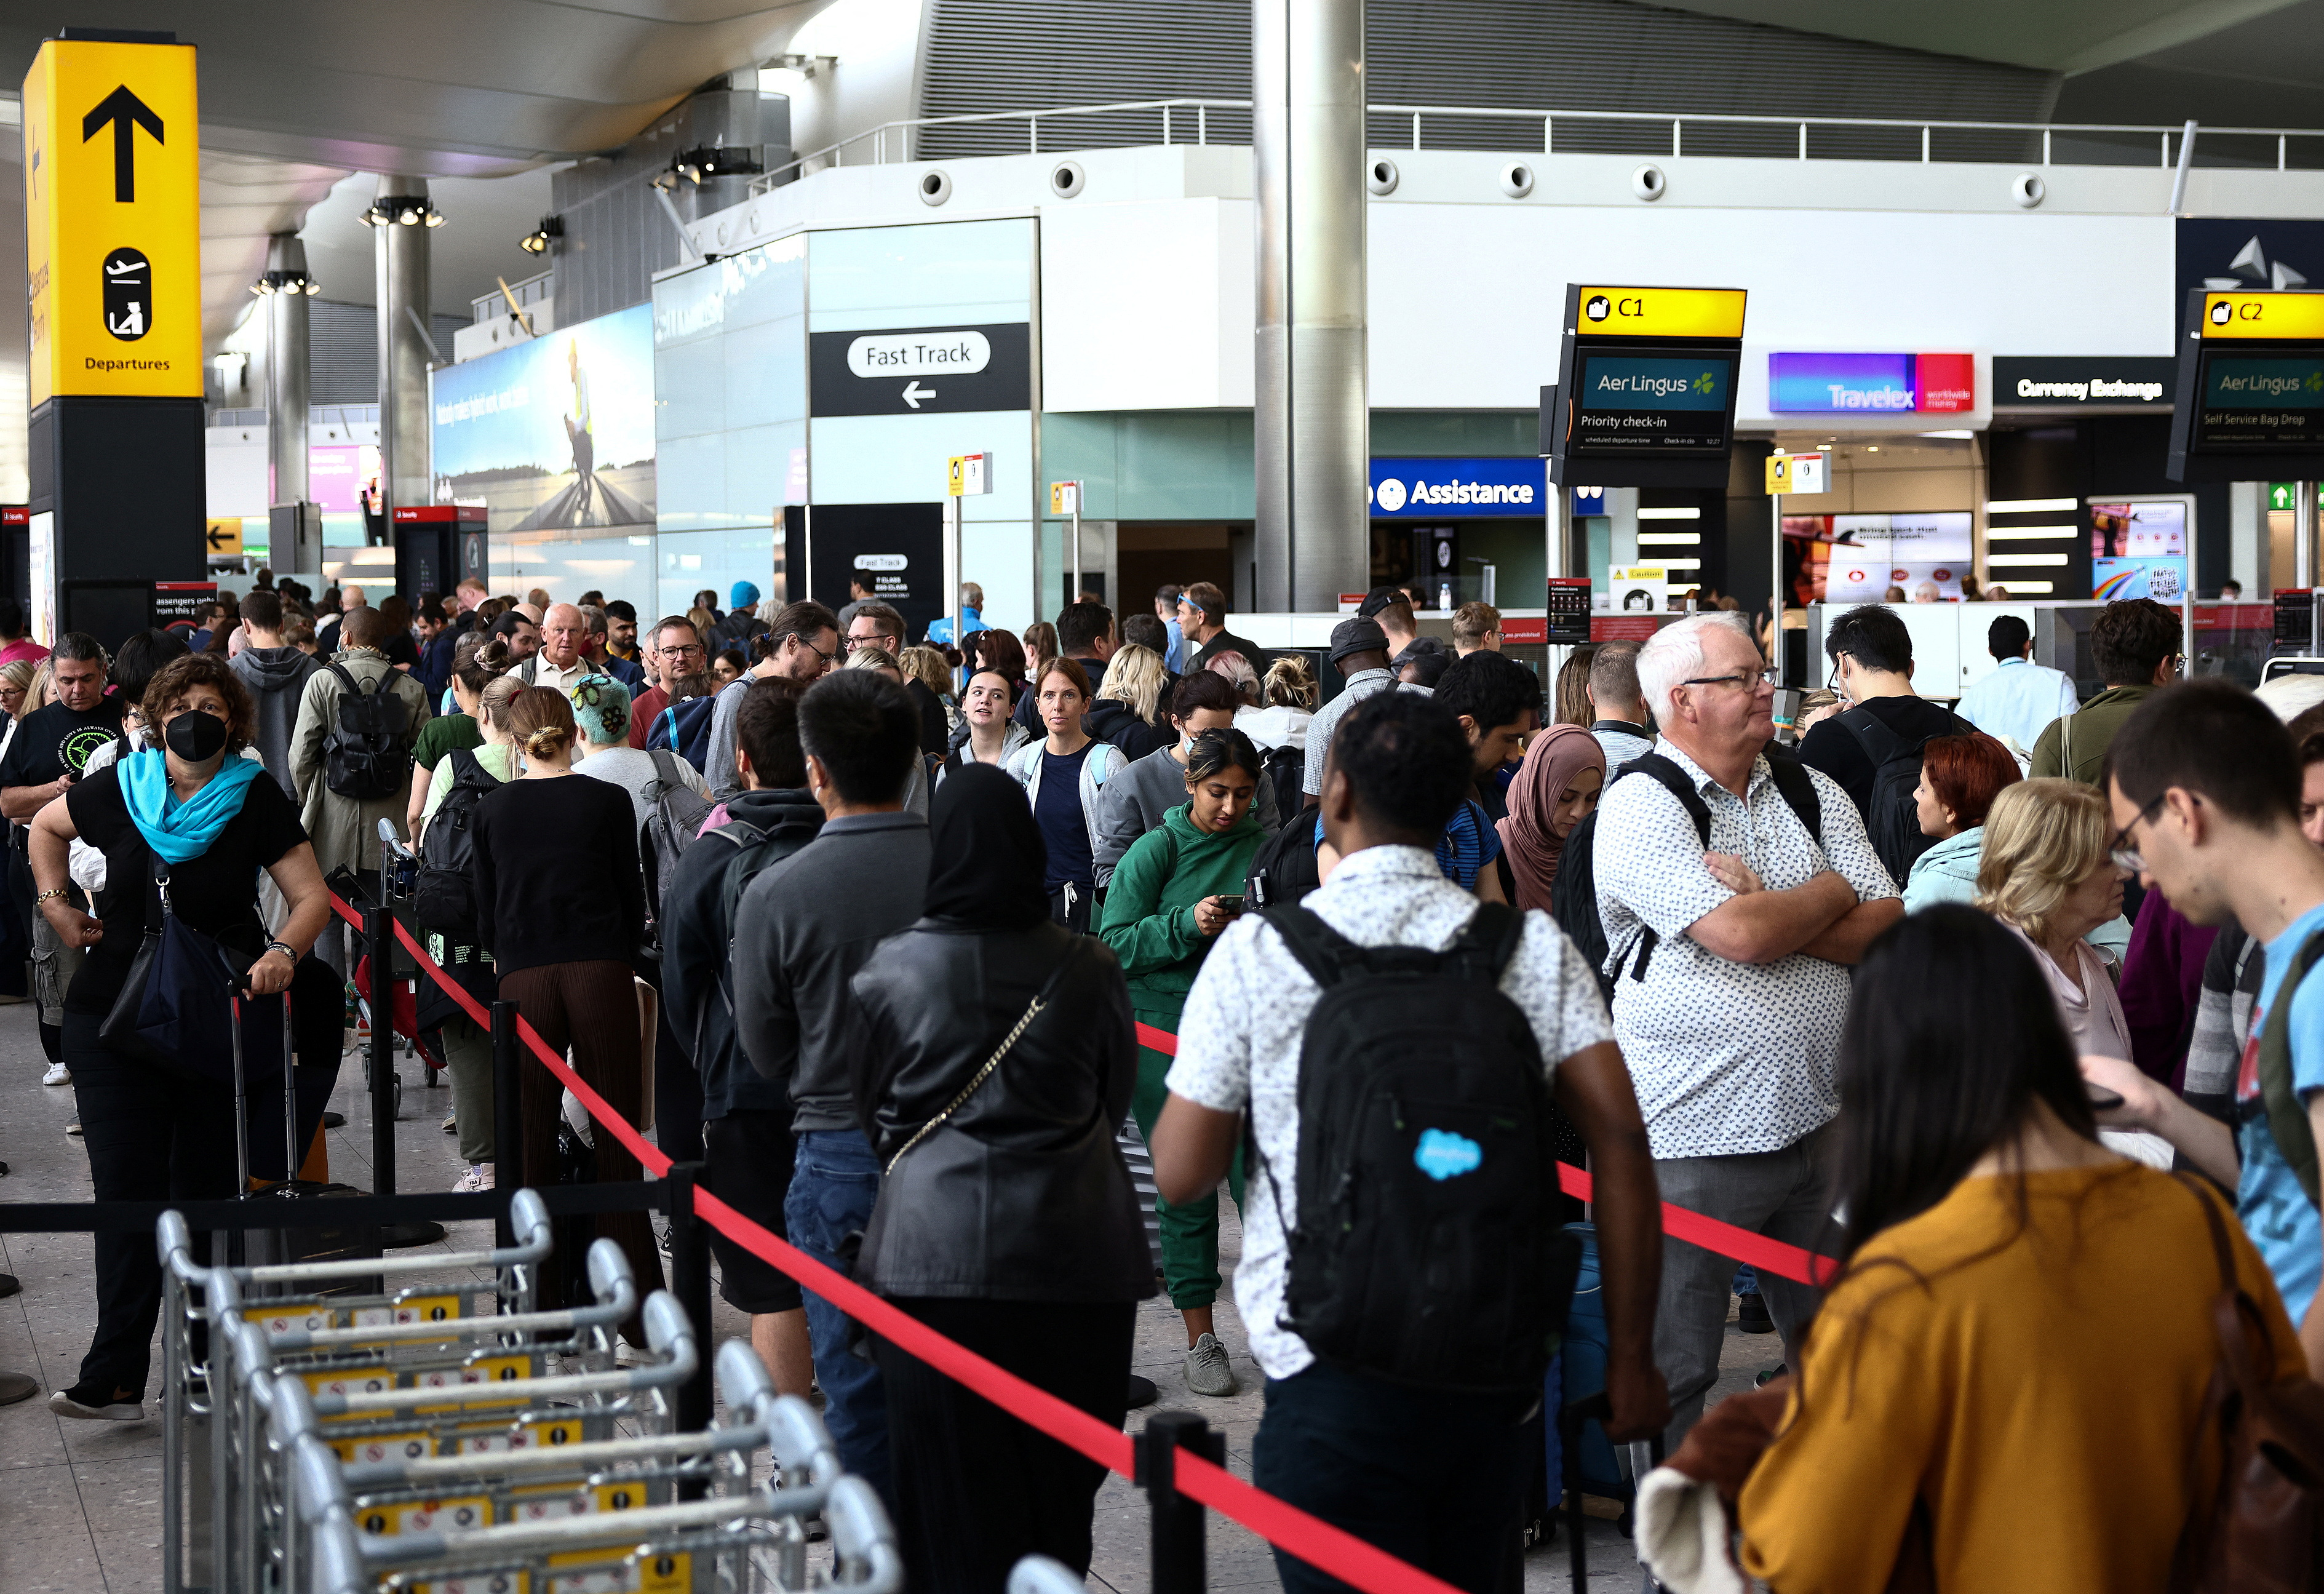 image Heathrow apologises for poor service, could ask for more flight cuts